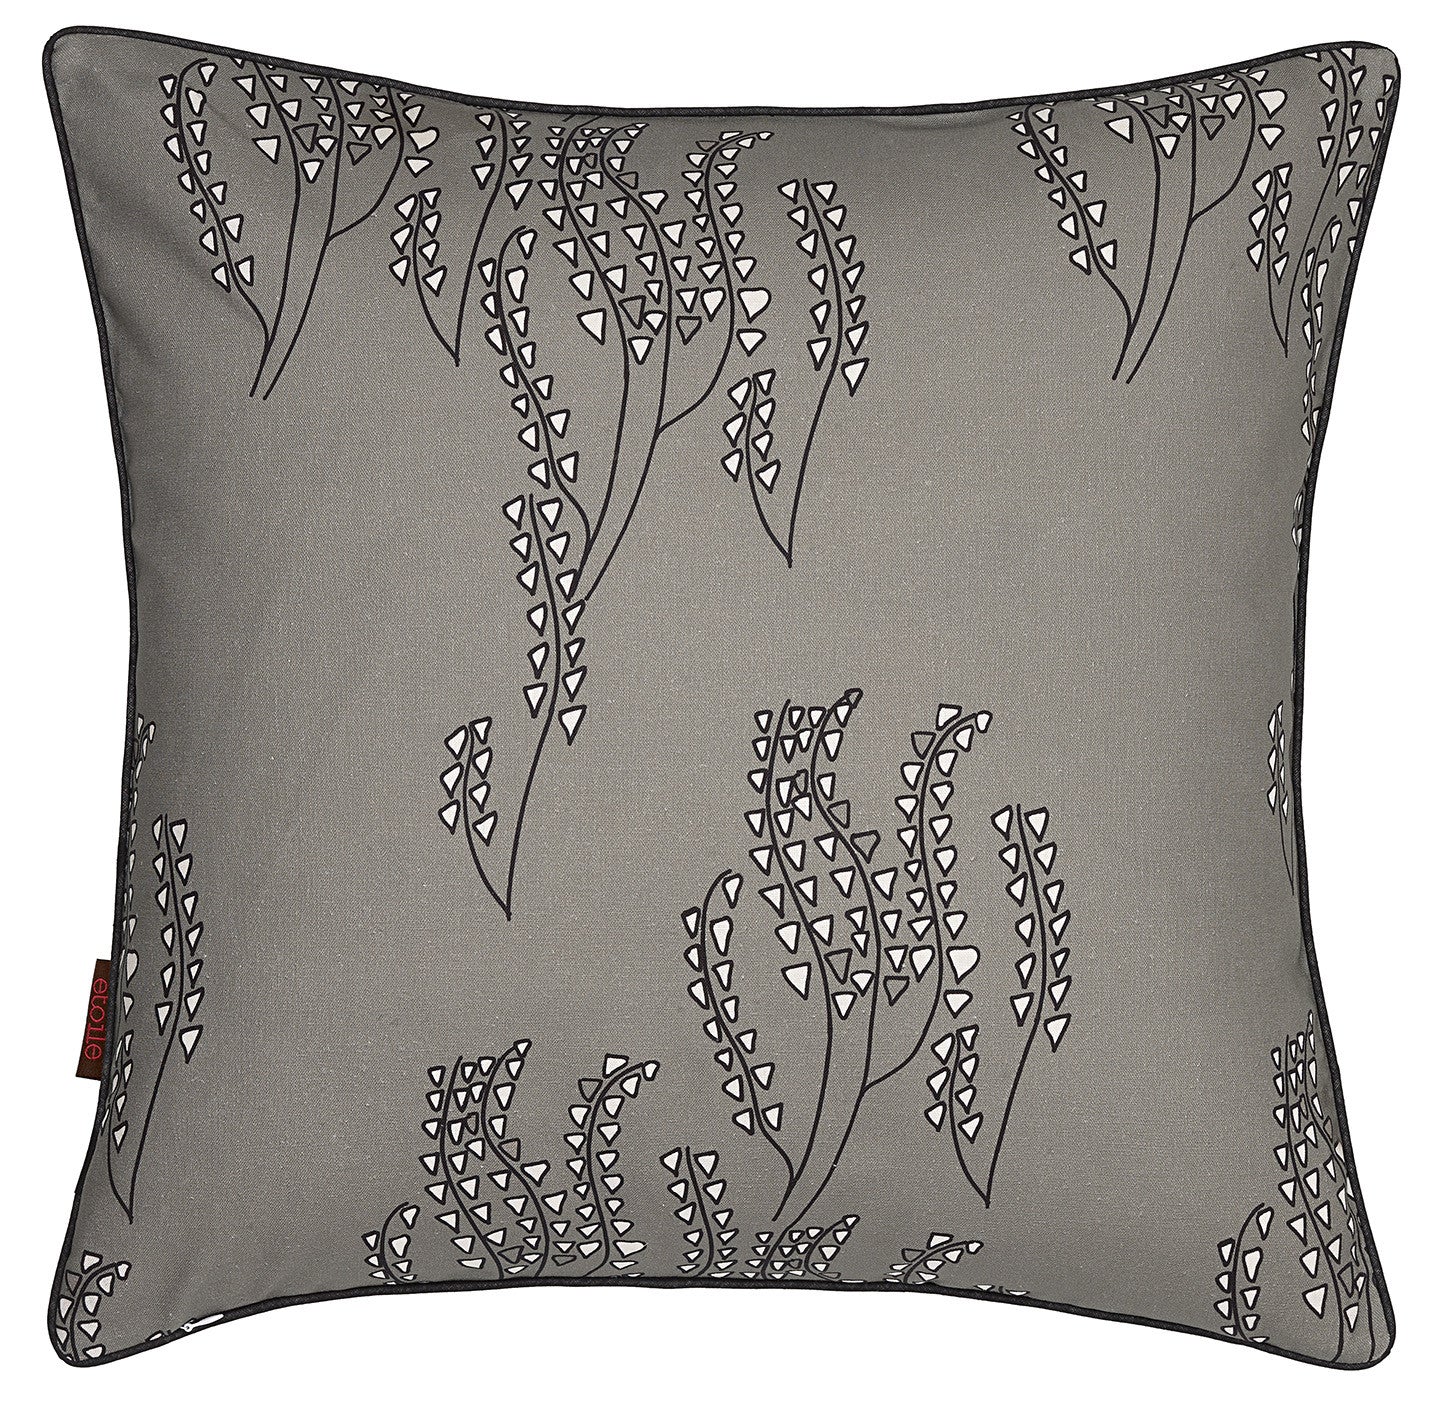 Yuma Grass Pattern Linen Cotton Throw Pillow in Light Dove Grey ships from Canada worldwide including the USA